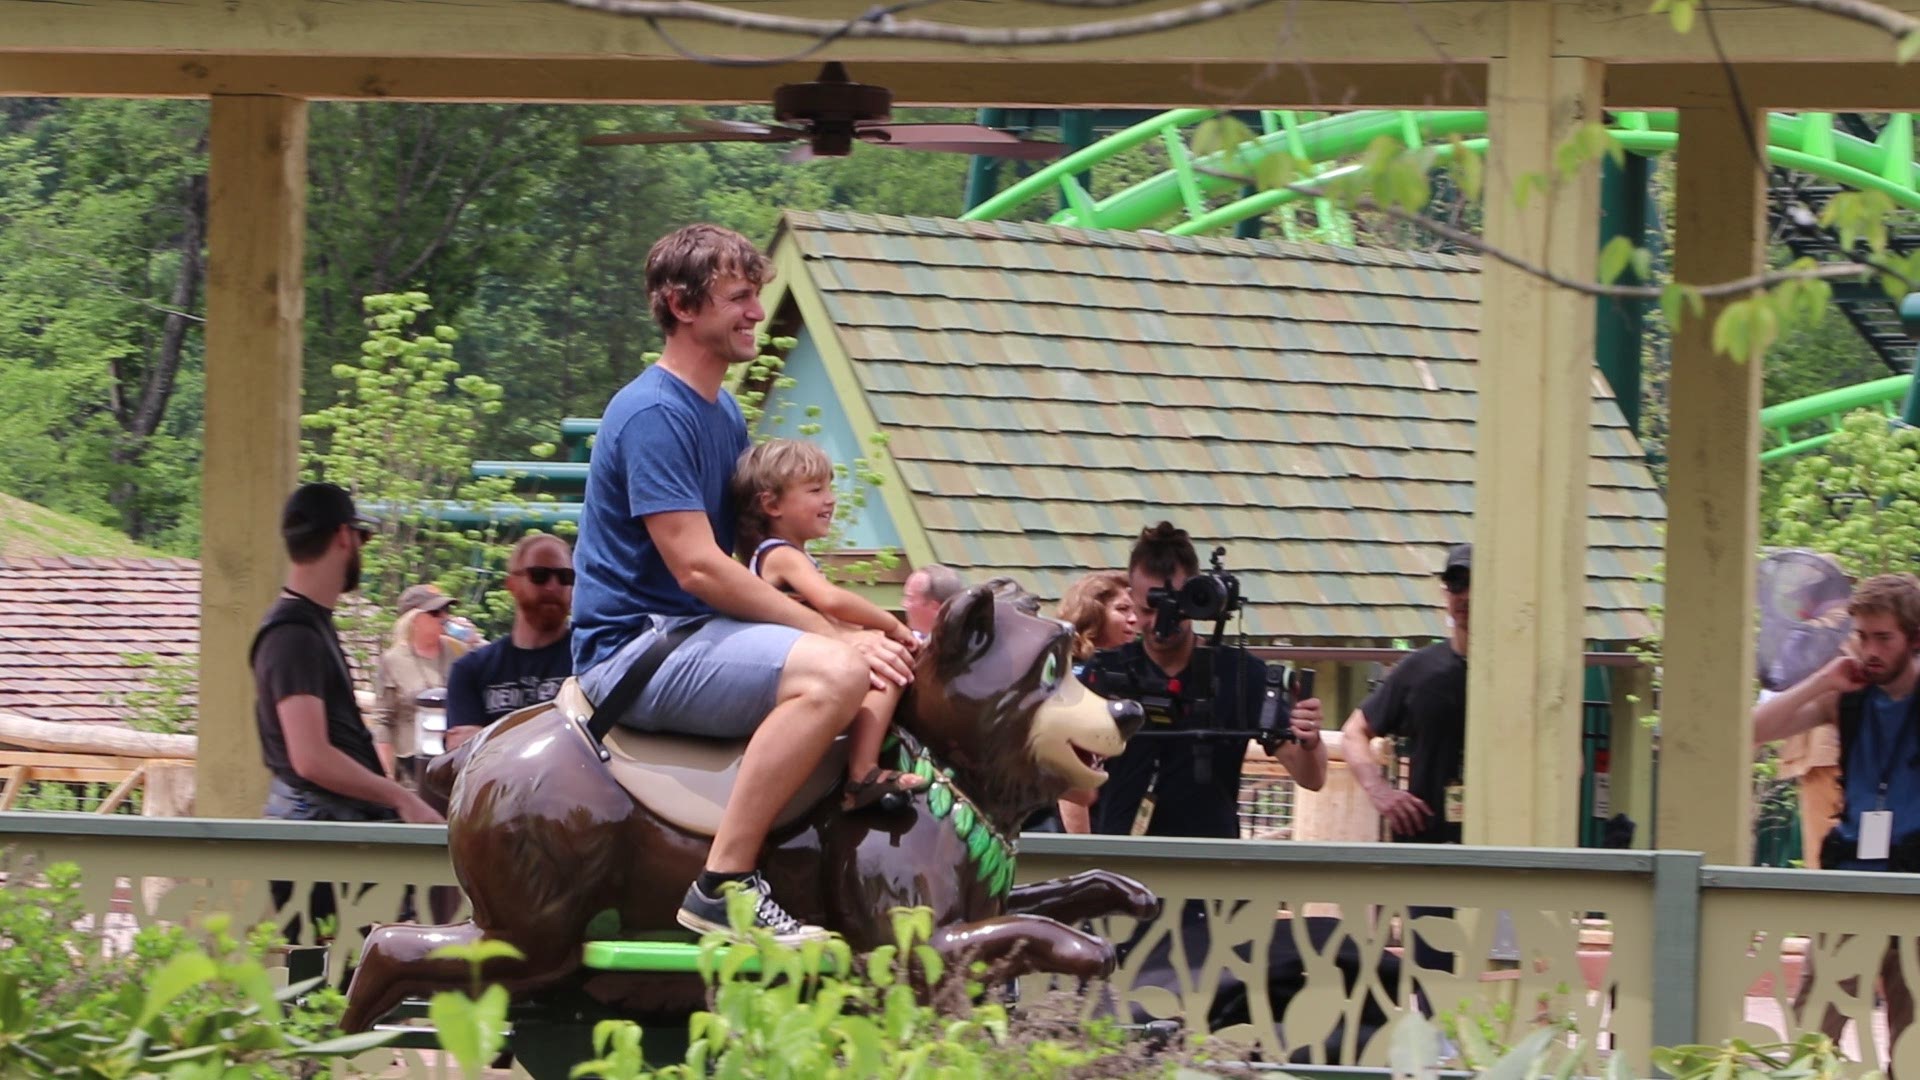 Parents and children enjoy Black Bear Trail, one of 'Wildwood Grove's cool rides.